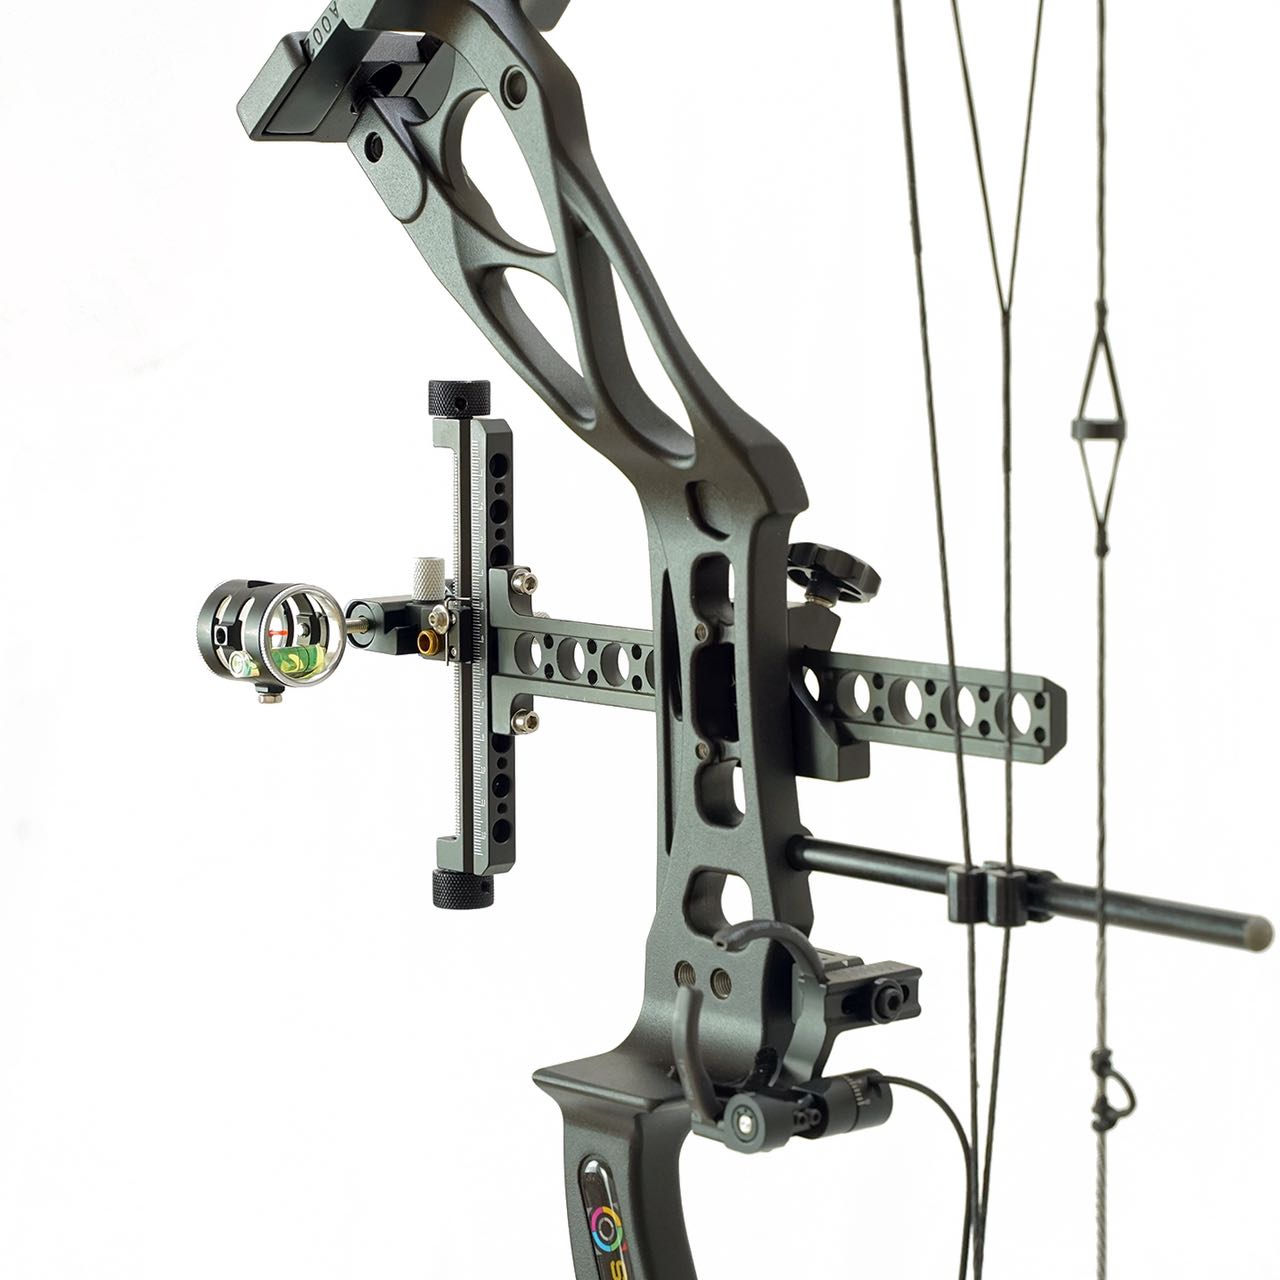 Sanlida X8 Target Compound Bow Package